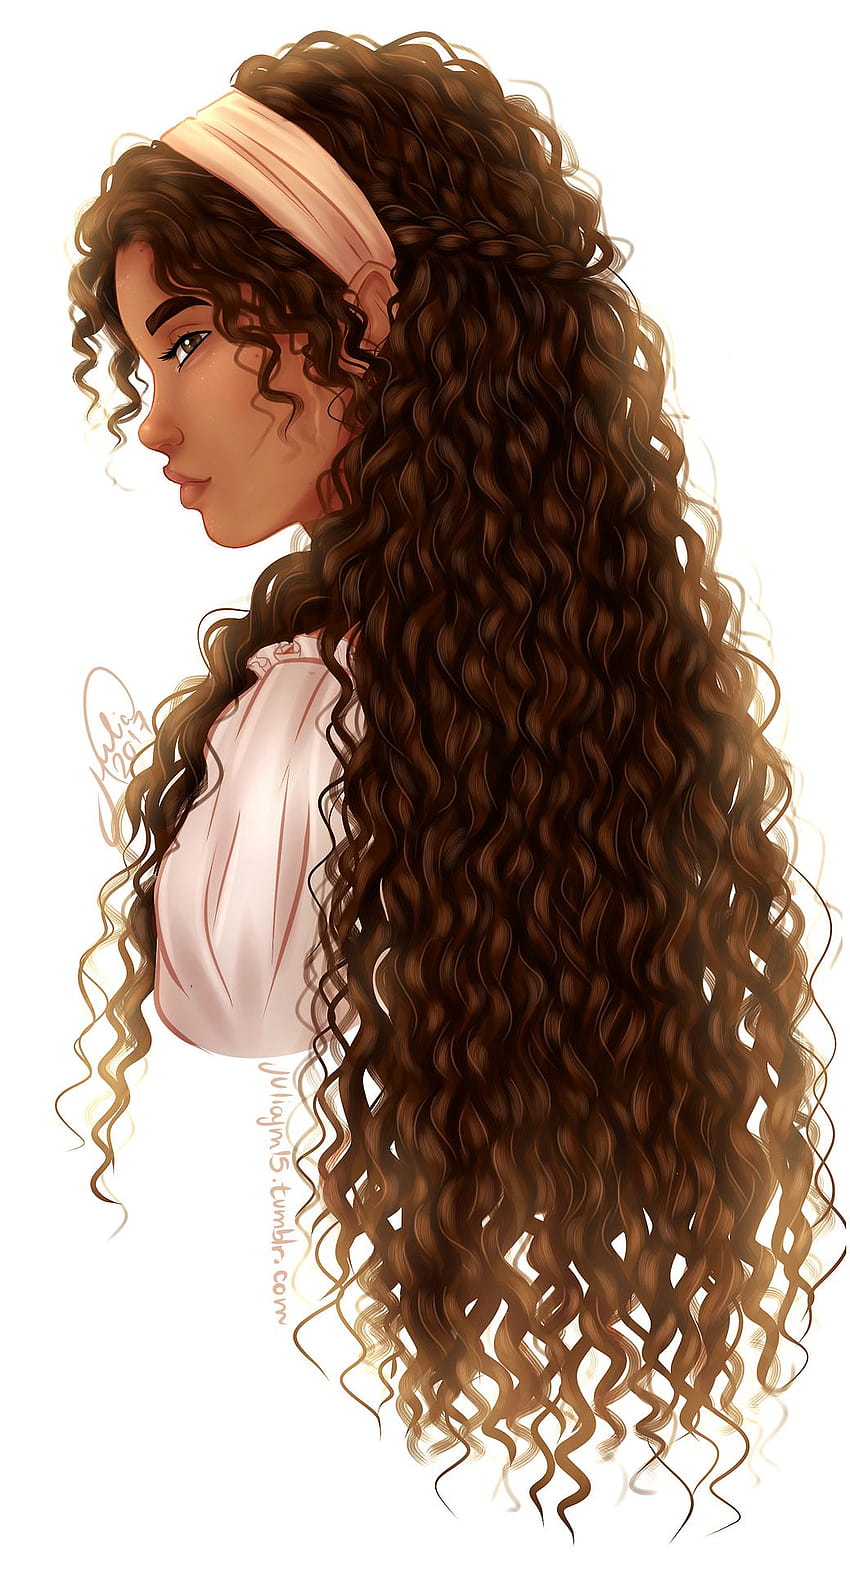 The Significants of Curly Hair | Anime Amino